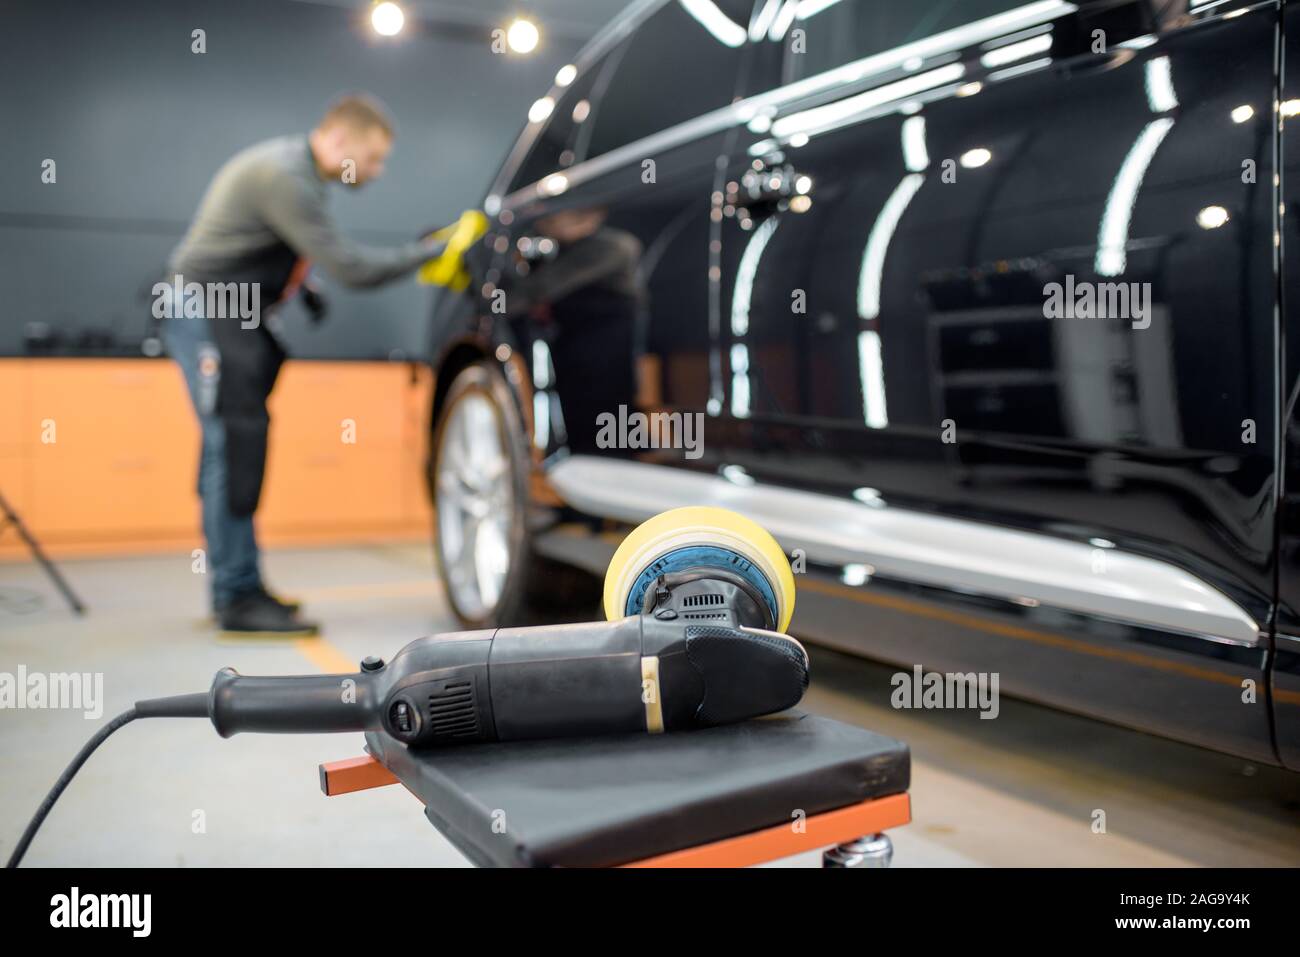 Car service worker wiping vehicle body with microfiber, examining glossy coating after the polishing procedure. Grinder on the foreground Stock Photo